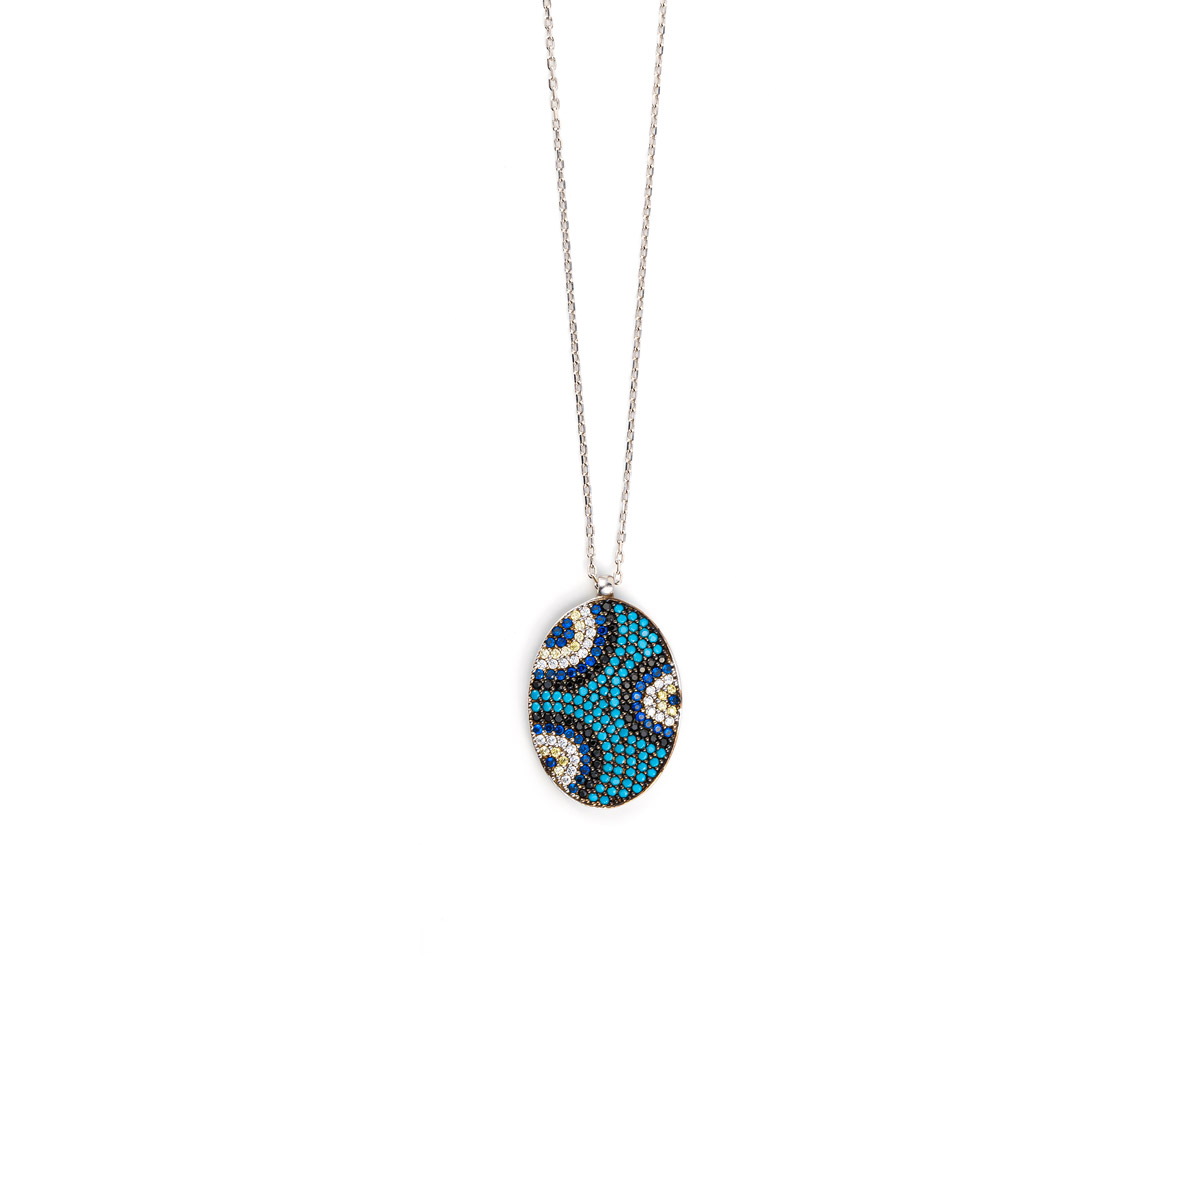 Evil Eye Necklace with Turquoise and Zircon - 925 Sterling Silver